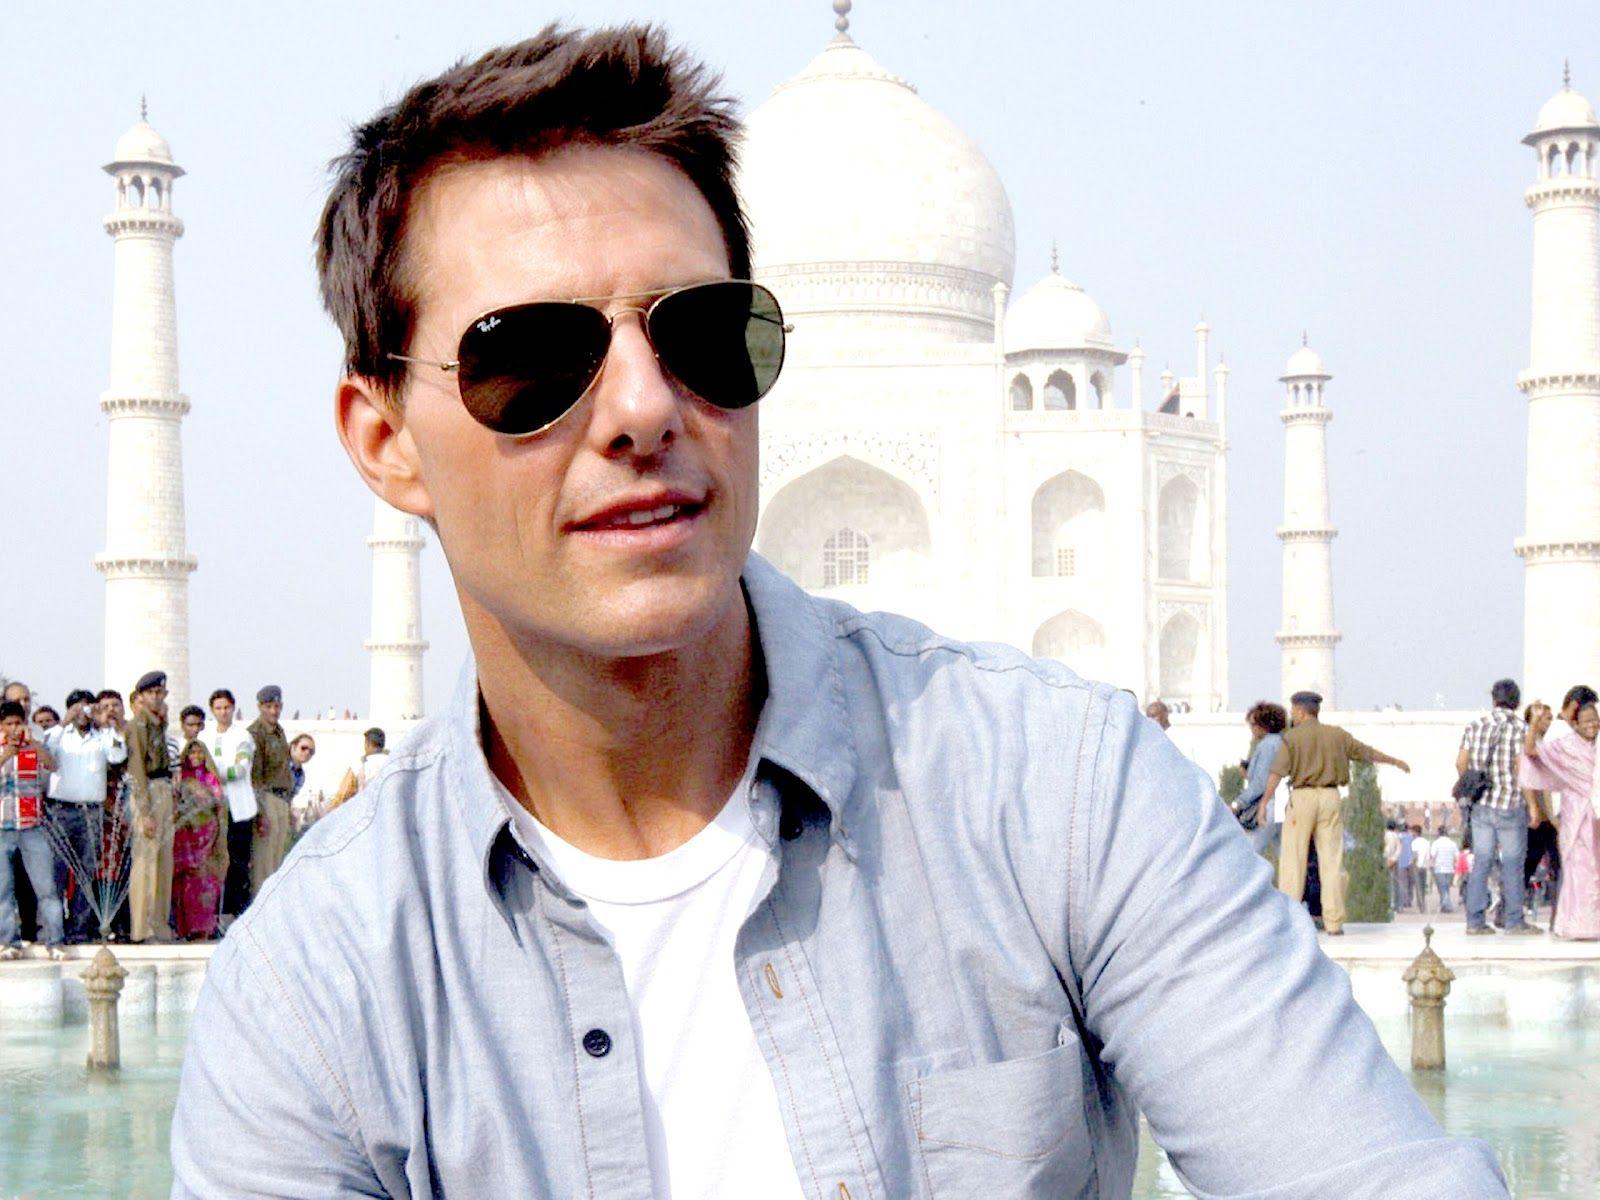 Tom Cruise new HD Wallpaper in 2012